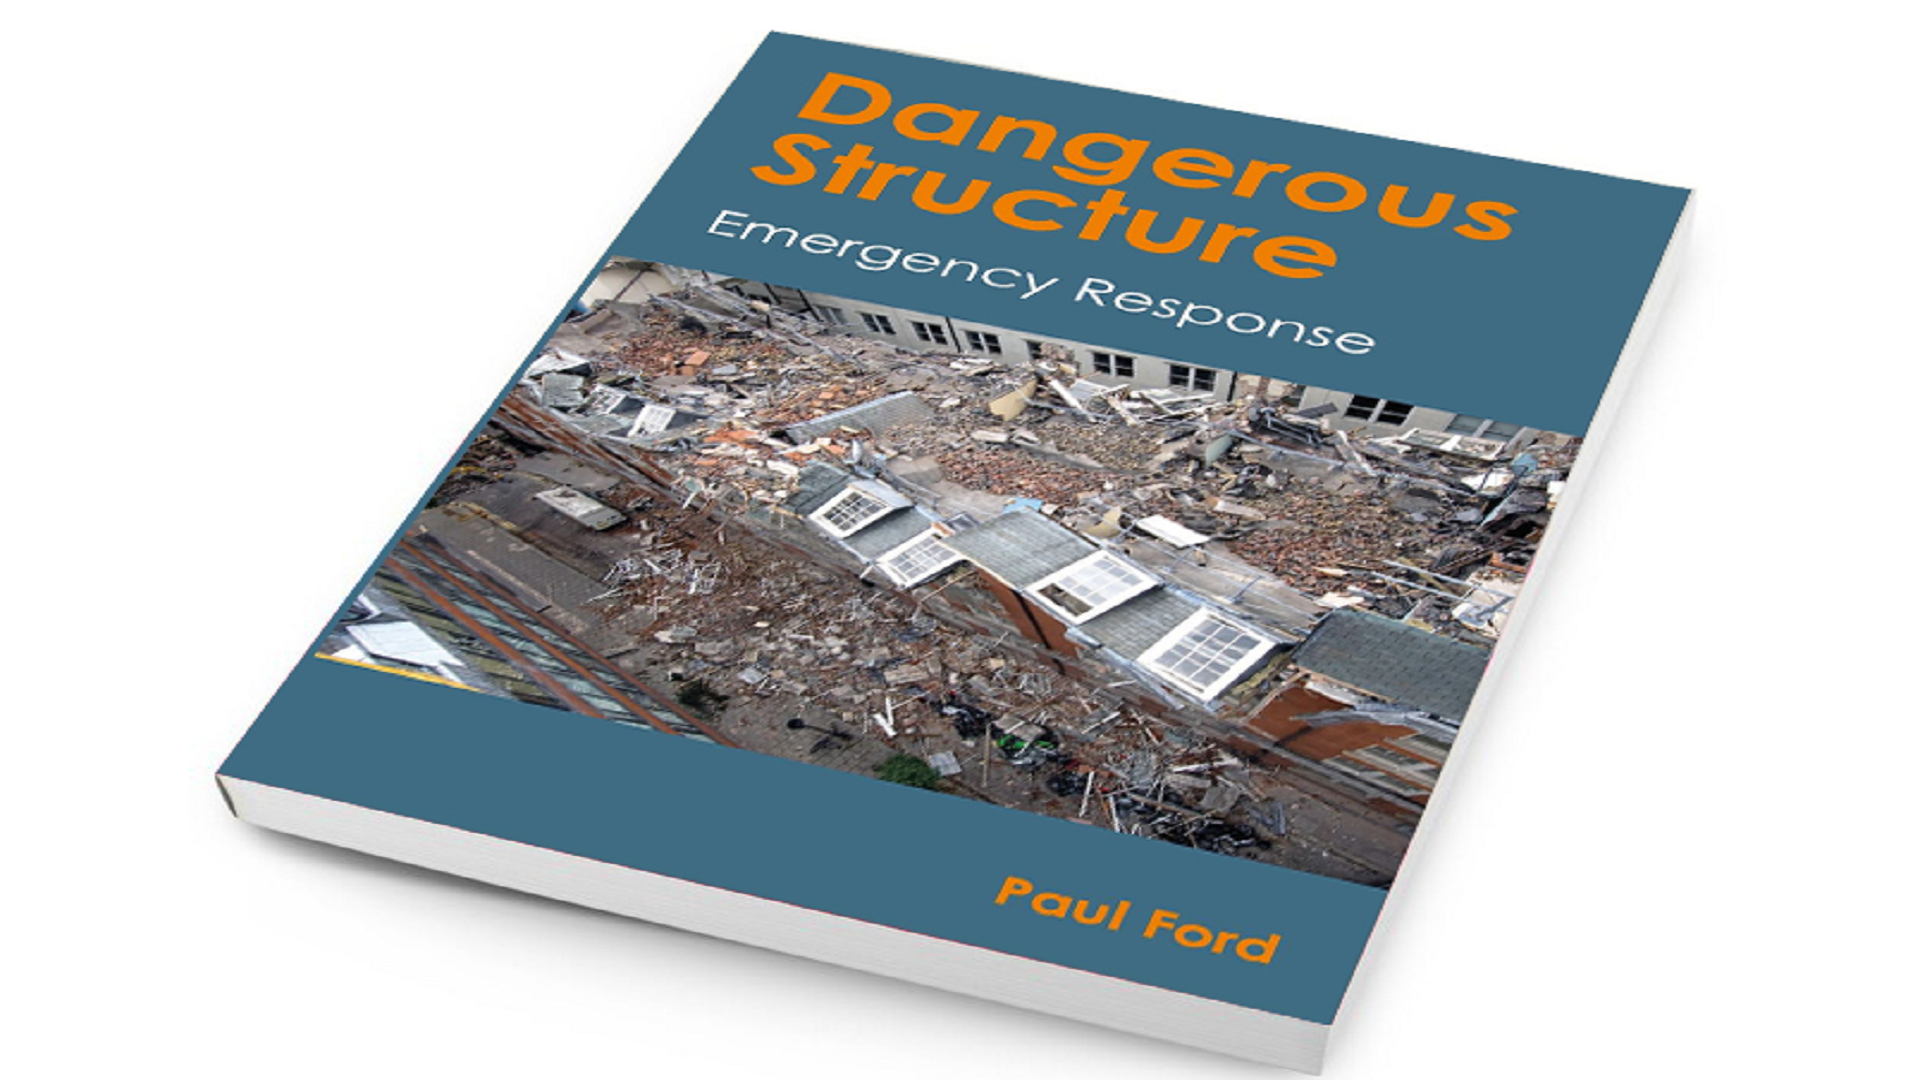 https://www.decontaminateuk.com/wp-content/uploads/2023/05/Dangerous-Structures-the-book_sticky.png